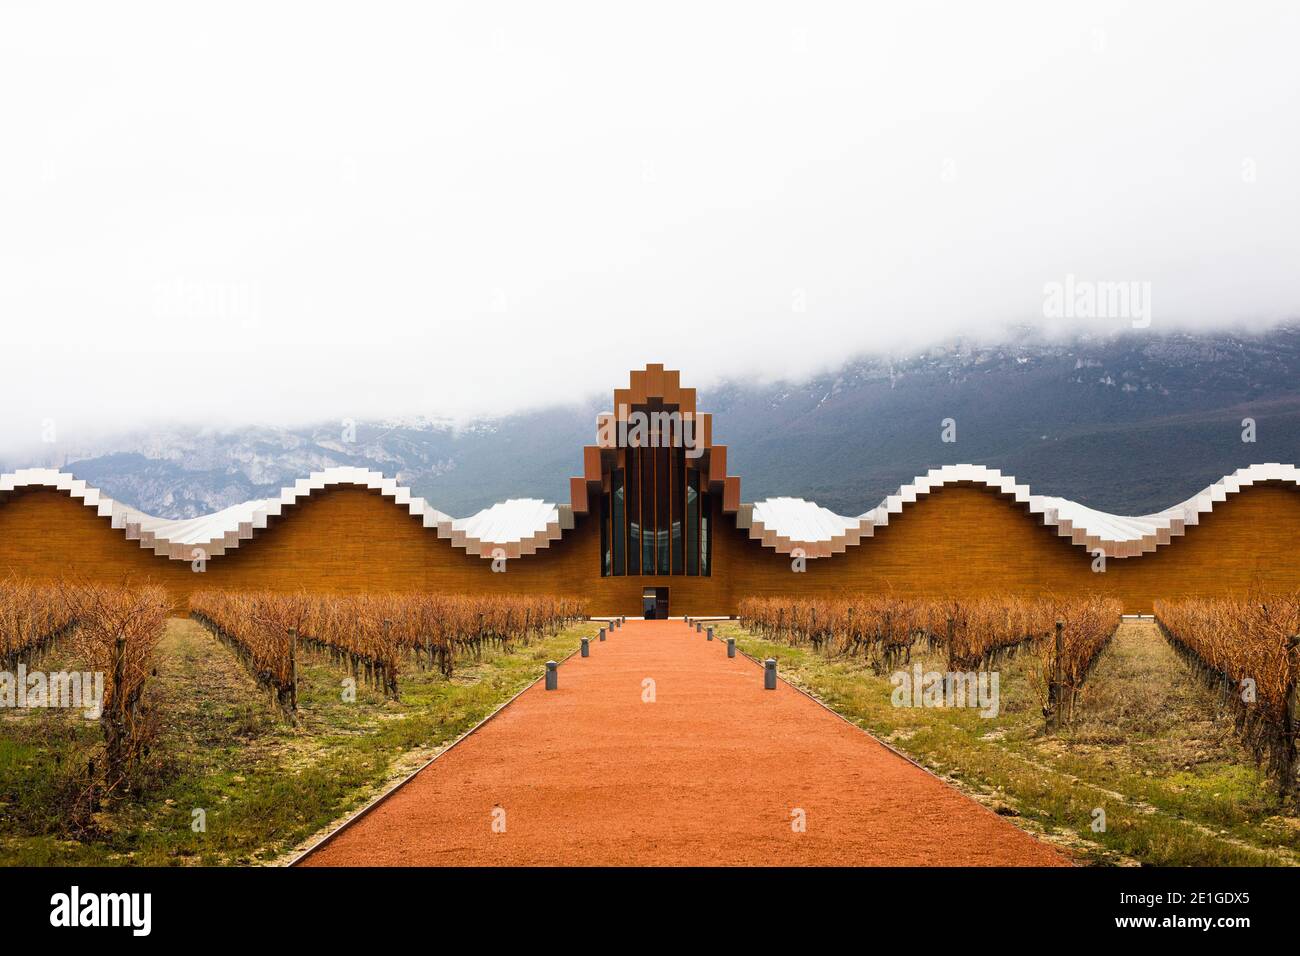 The Bogedgas Ysios Winery, Laguardia is designed by Santiago Calatrava.  It is located in the foothills of Alava, Spain. Stock Photo